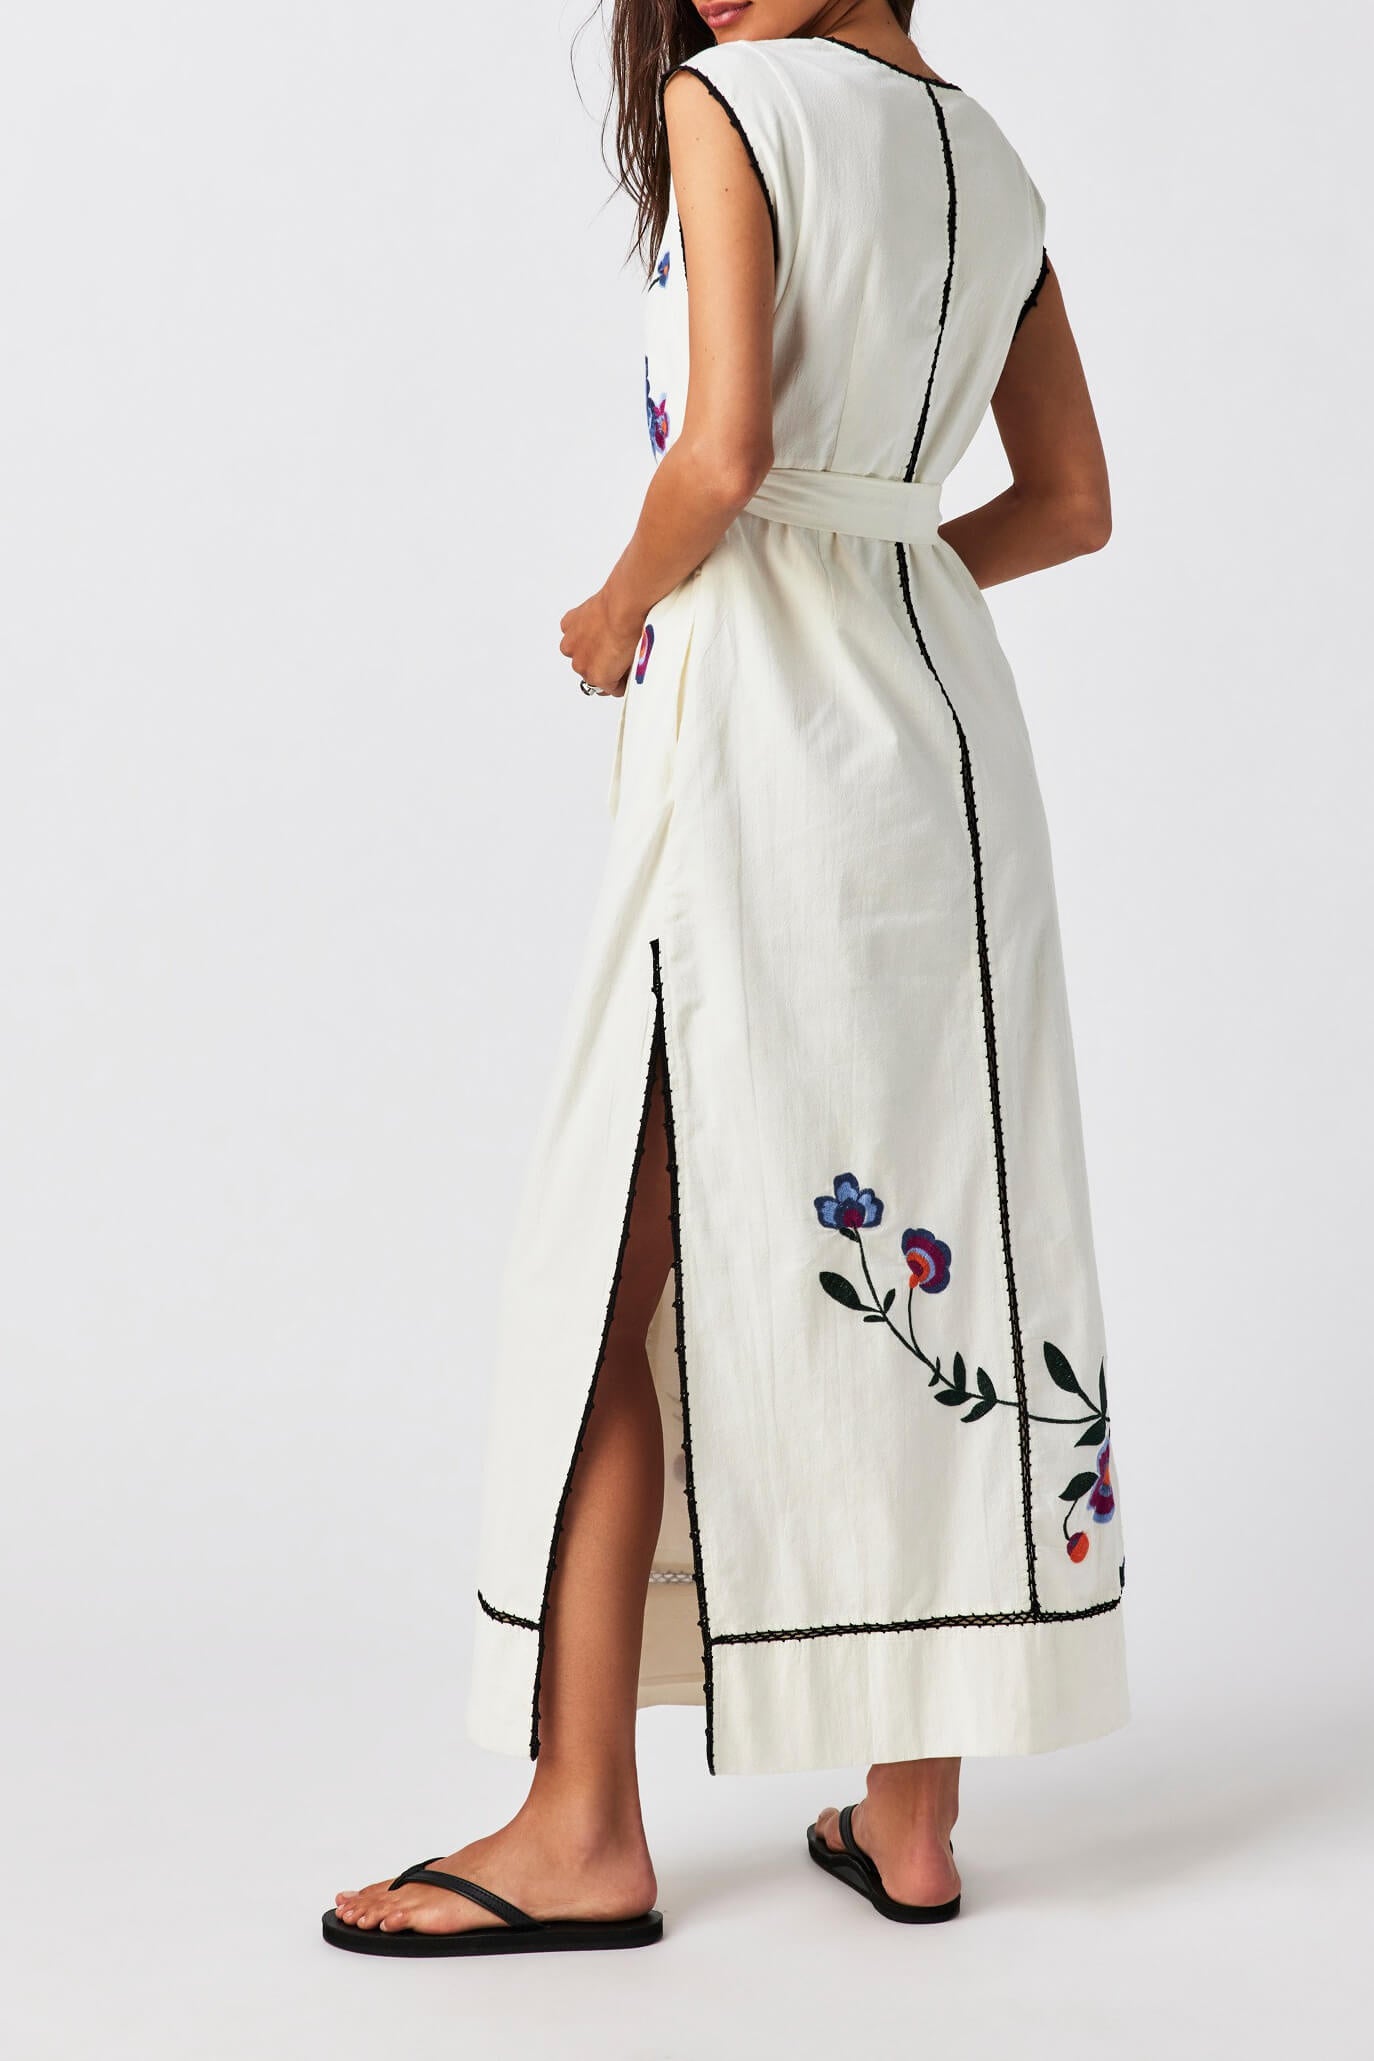 free people embroidered dress